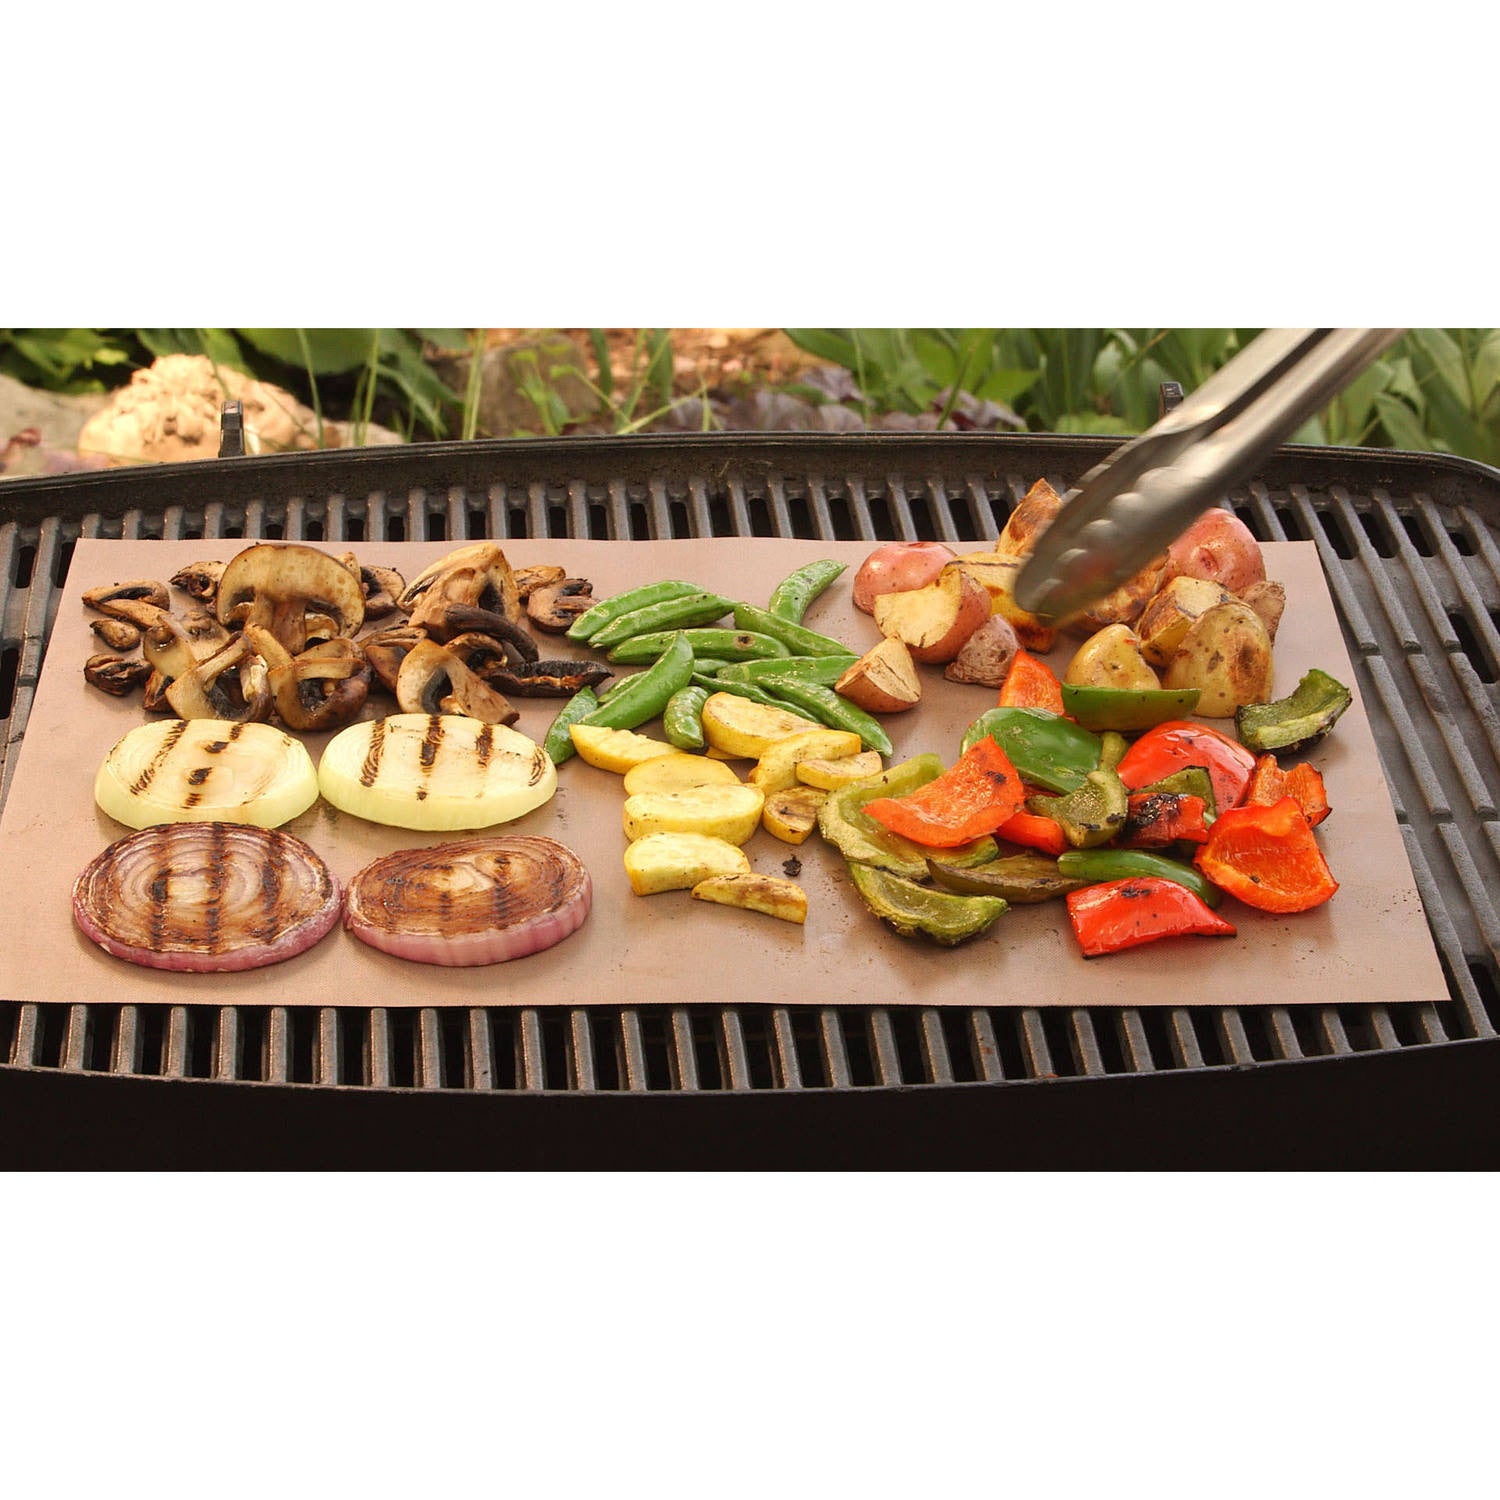 Yoshi Copper BBQ Grill Mat Value Pack - Set of 3 - Home Gadgets